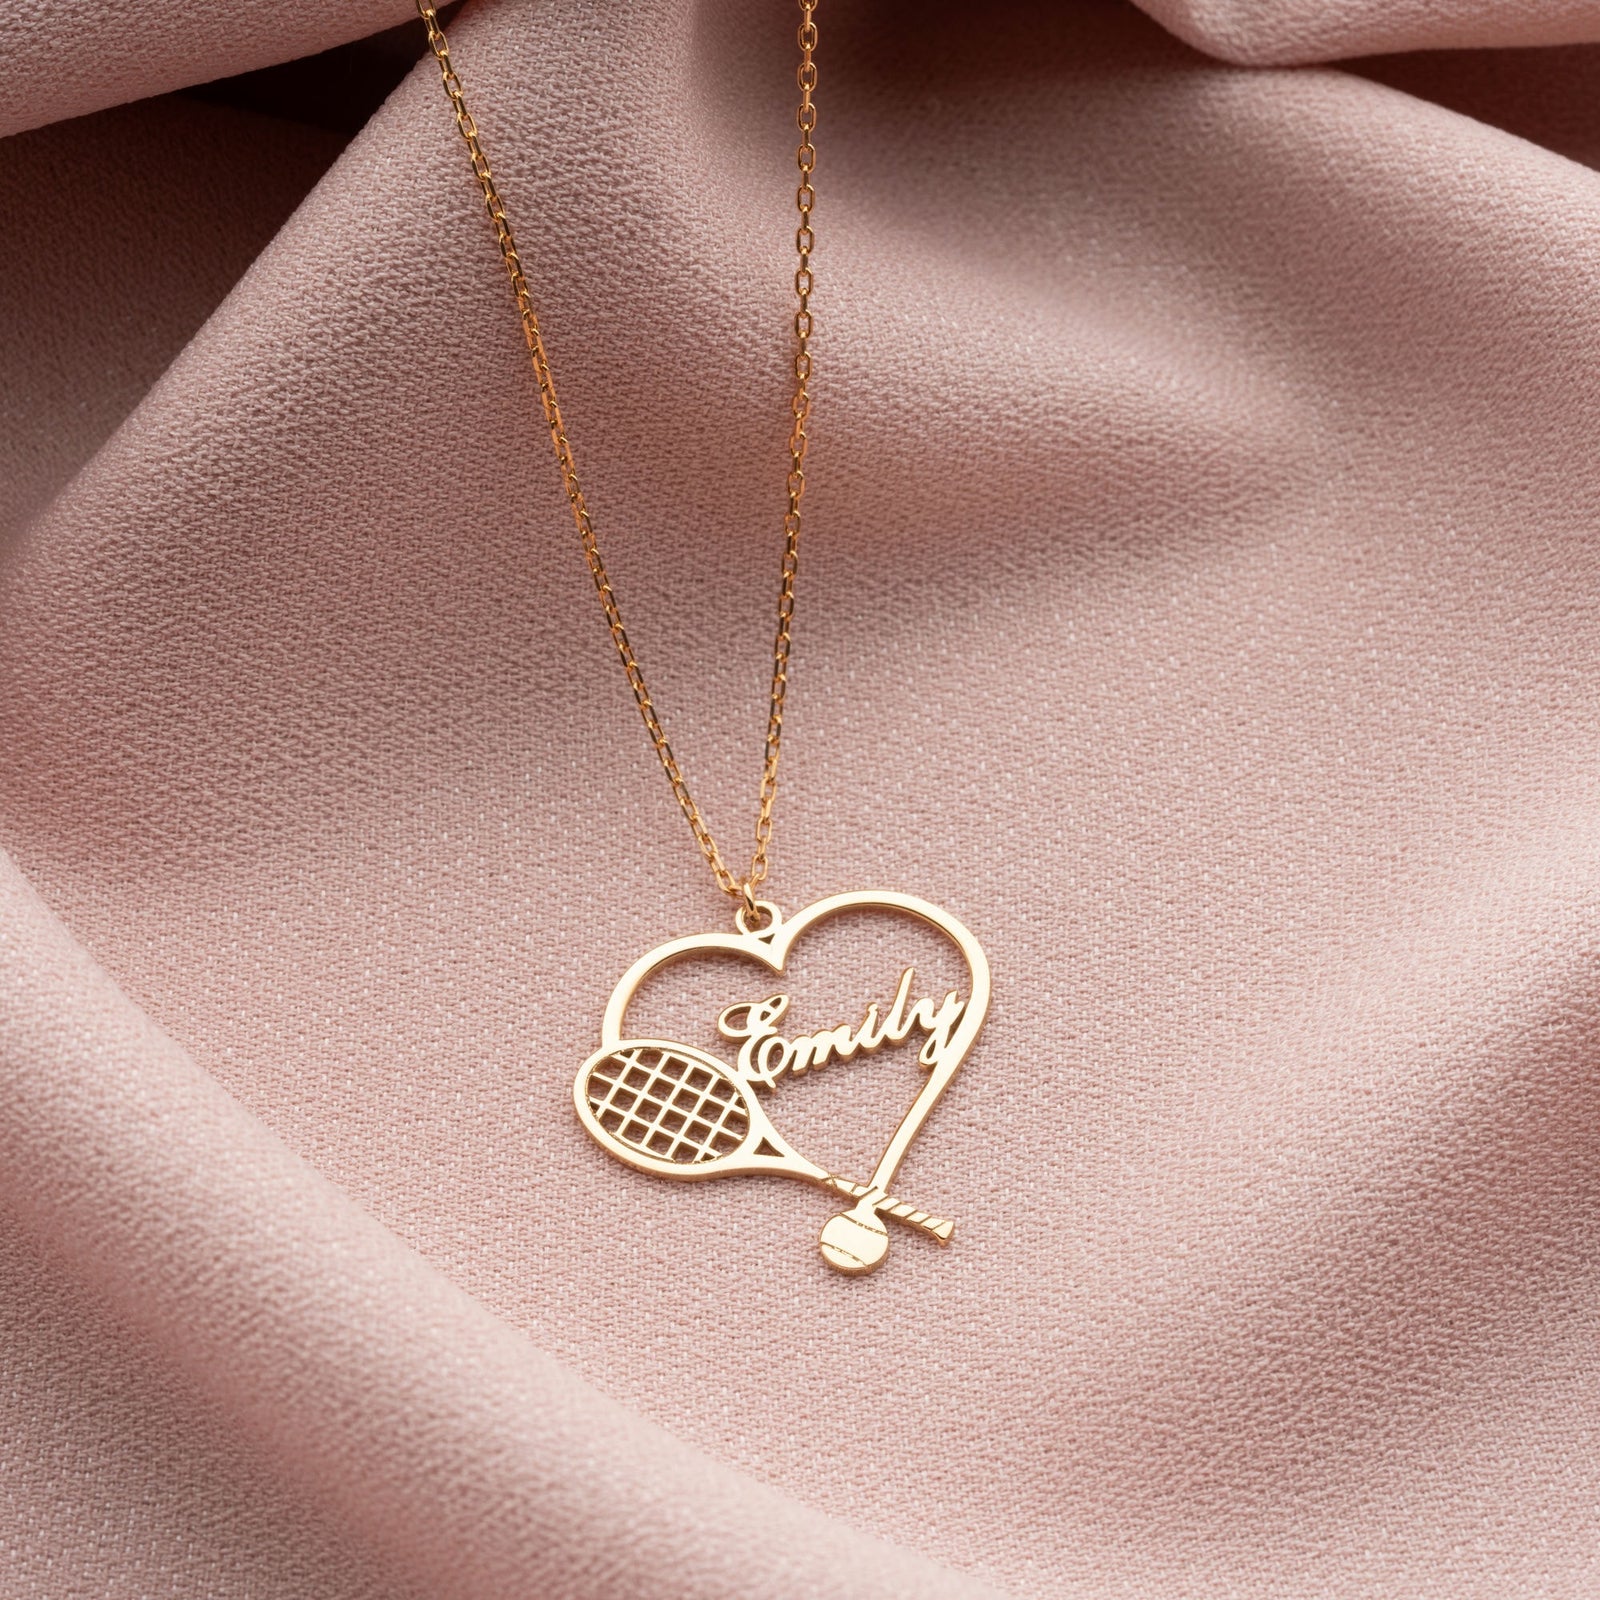 Heart Shaped Tennis Racket Necklace With Name